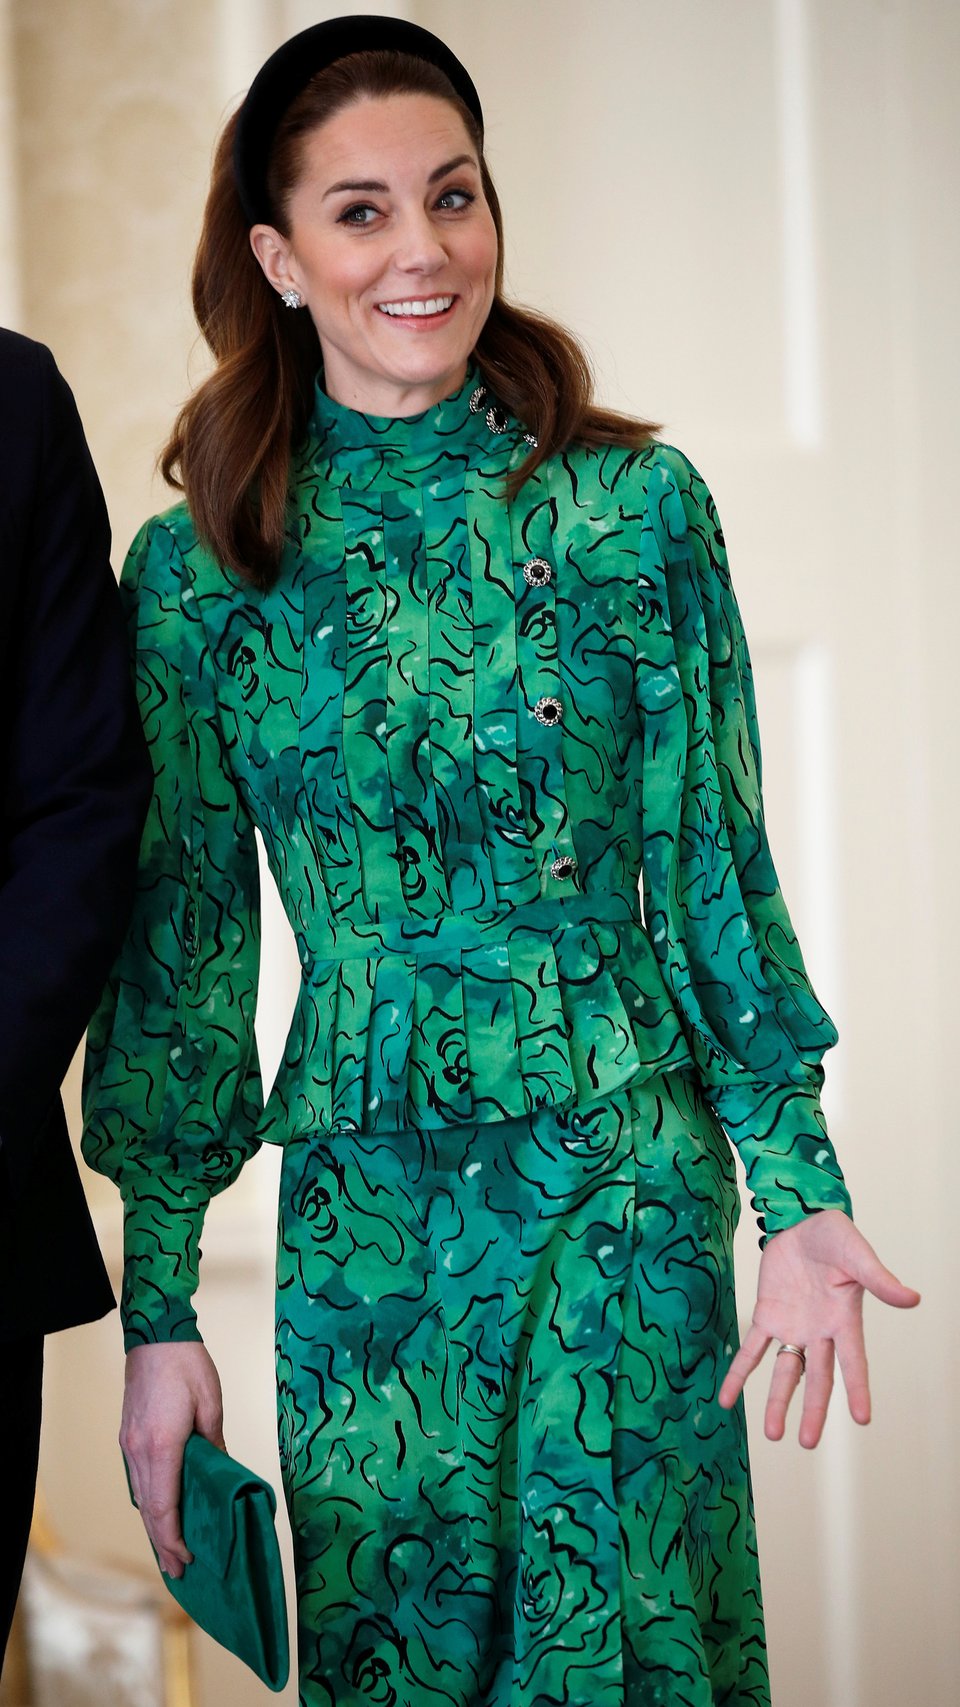 The Duchess of Cambridge in Dublin during her three day visit to the Republic of Ireland